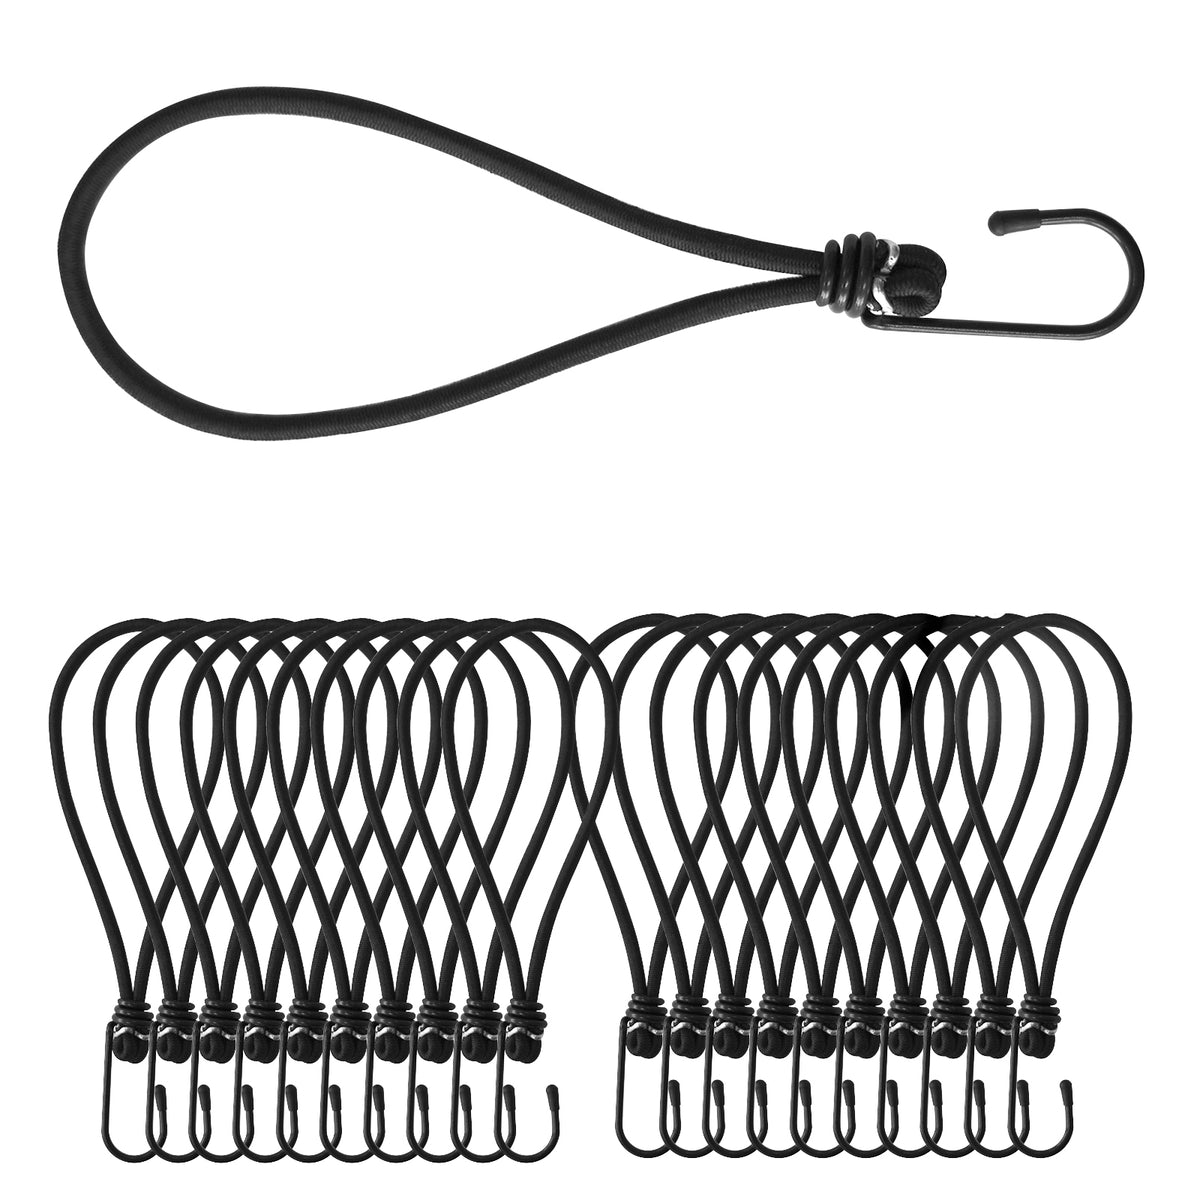 Multifunctional elasticated straps with steel hooks | fastening for tarpaulins nets banners | set of 20